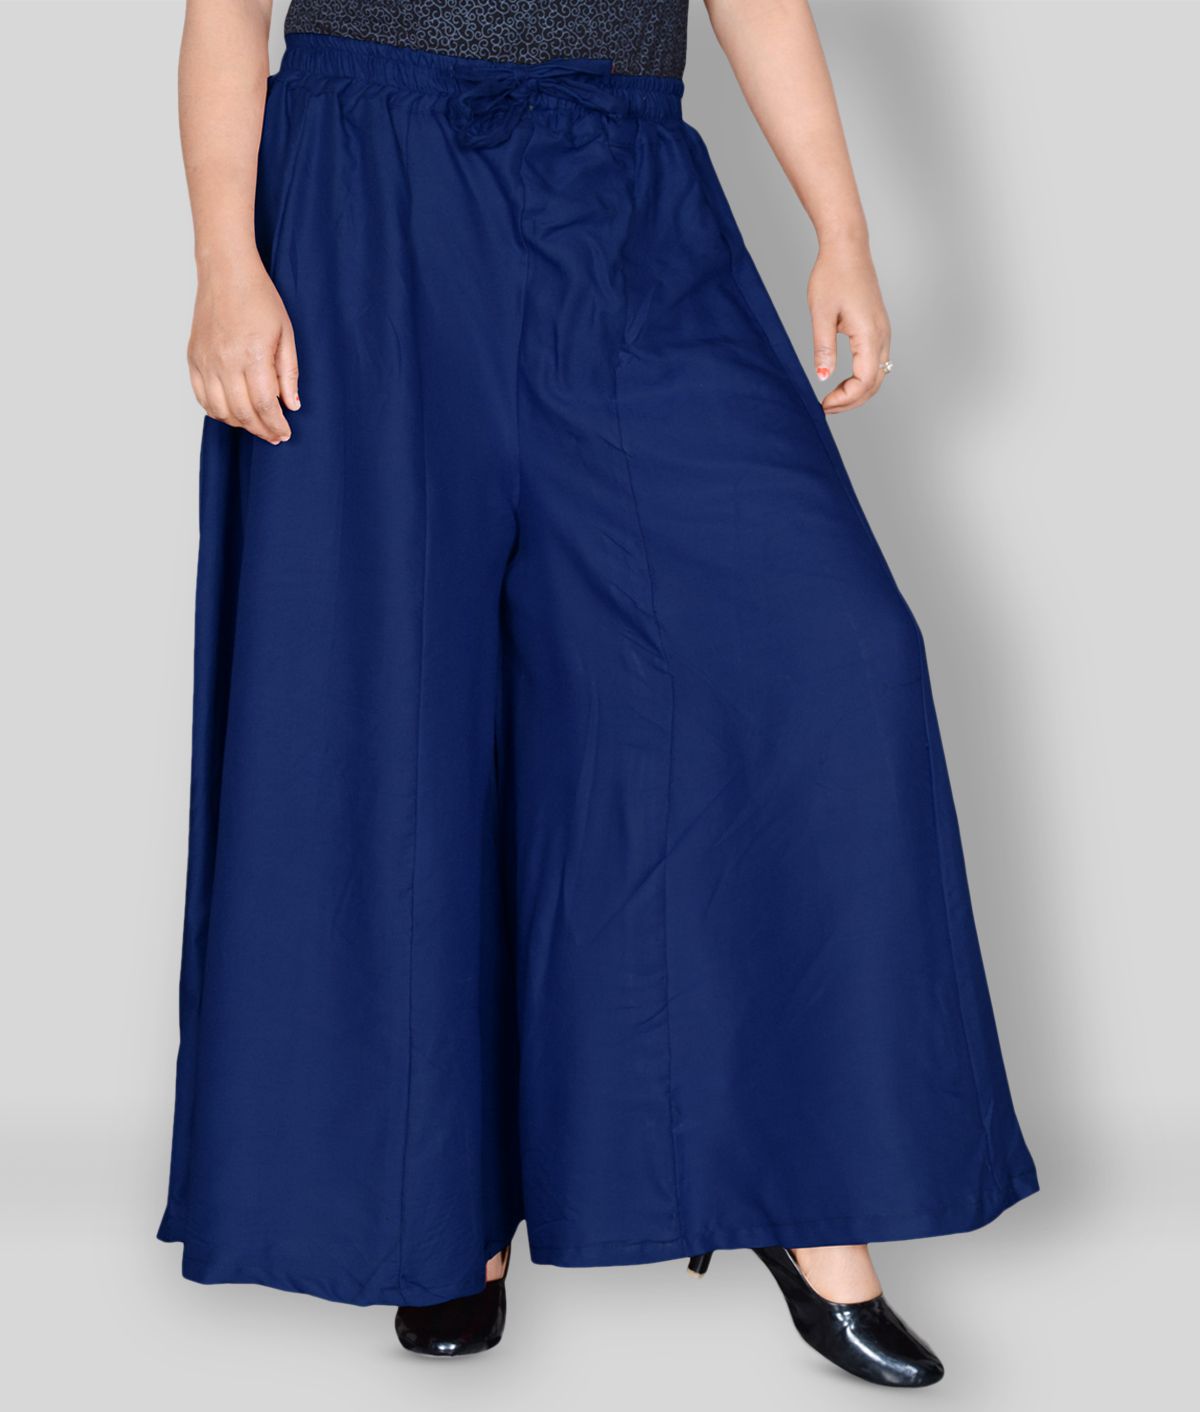     			Sttoffa - Navy Blue Rayon Flared Women's Palazzos ( Pack of 1 )